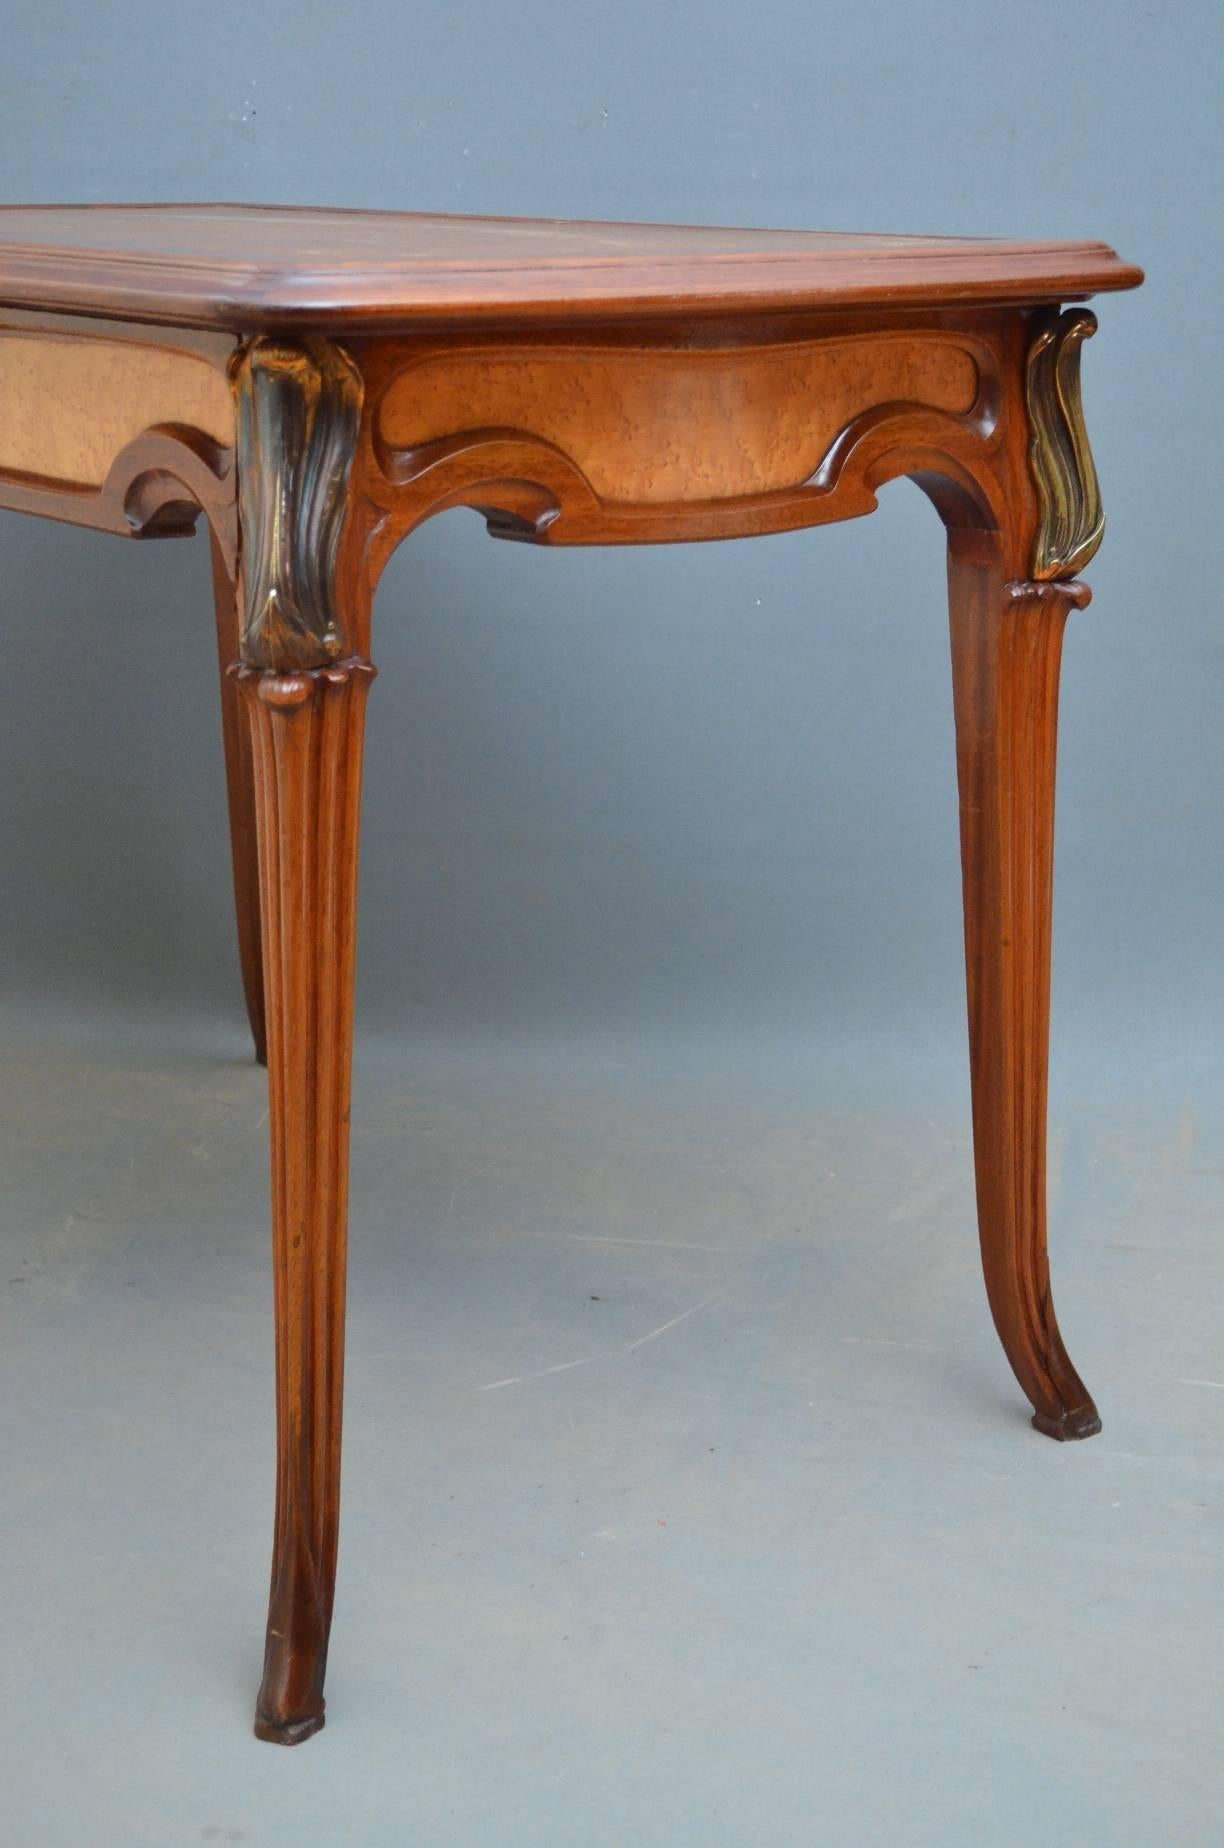 Early 20th Century Sophisticated Art Nouveau Writing Table